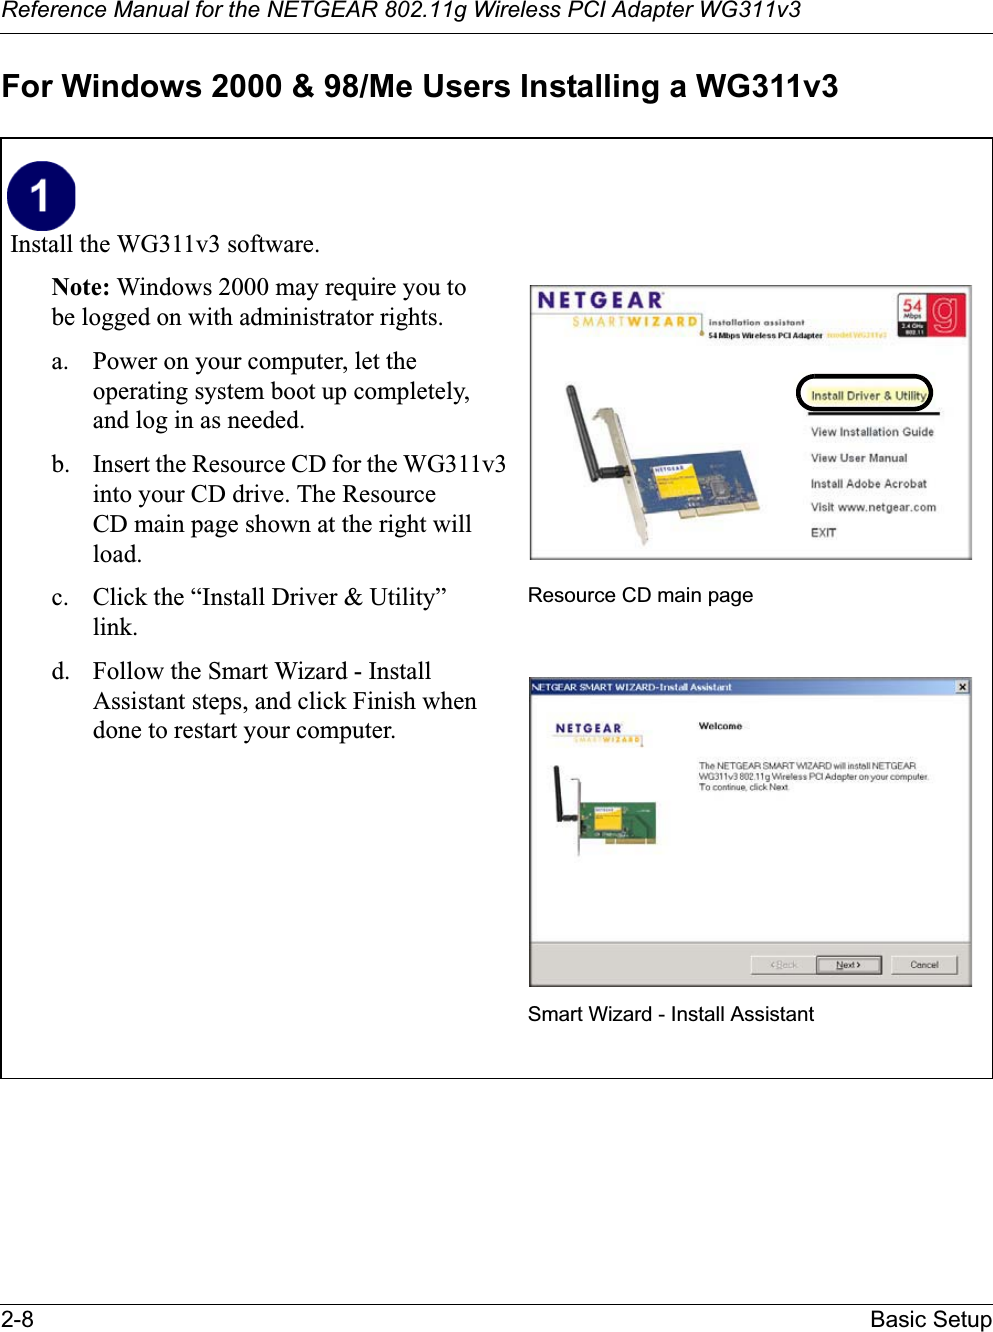 Reference Manual for the NETGEAR 802.11g Wireless PCI Adapter WG311v32-8 Basic SetupFor Windows 2000 &amp; 98/Me Users Installing a WG311v3Install the WG311v3 software. Note: Windows 2000 may require you to be logged on with administrator rights.a. Power on your computer, let the operating system boot up completely, and log in as needed.b. Insert the Resource CD for the WG311v3into your CD drive. The ResourceCD main page shown at the right will load.c. Click the “Install Driver &amp; Utility” link.d. Follow the Smart Wizard - Install Assistant steps, and click Finish when done to restart your computer.Resource CD main pageSmart Wizard - Install Assistant